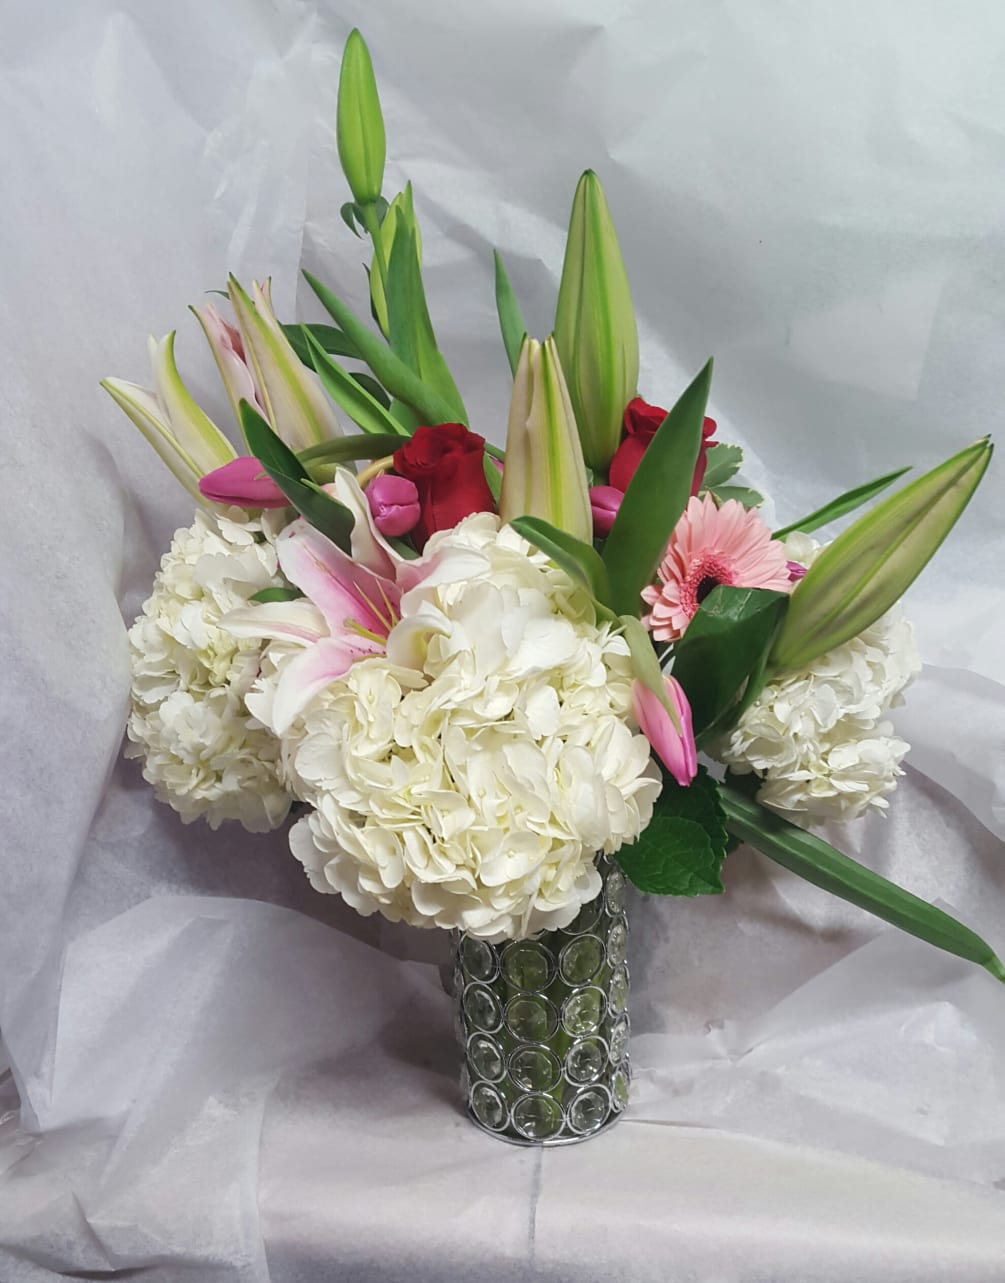 This elegant bouquet features stunning white hydrangea star gazer lilies, tulips and